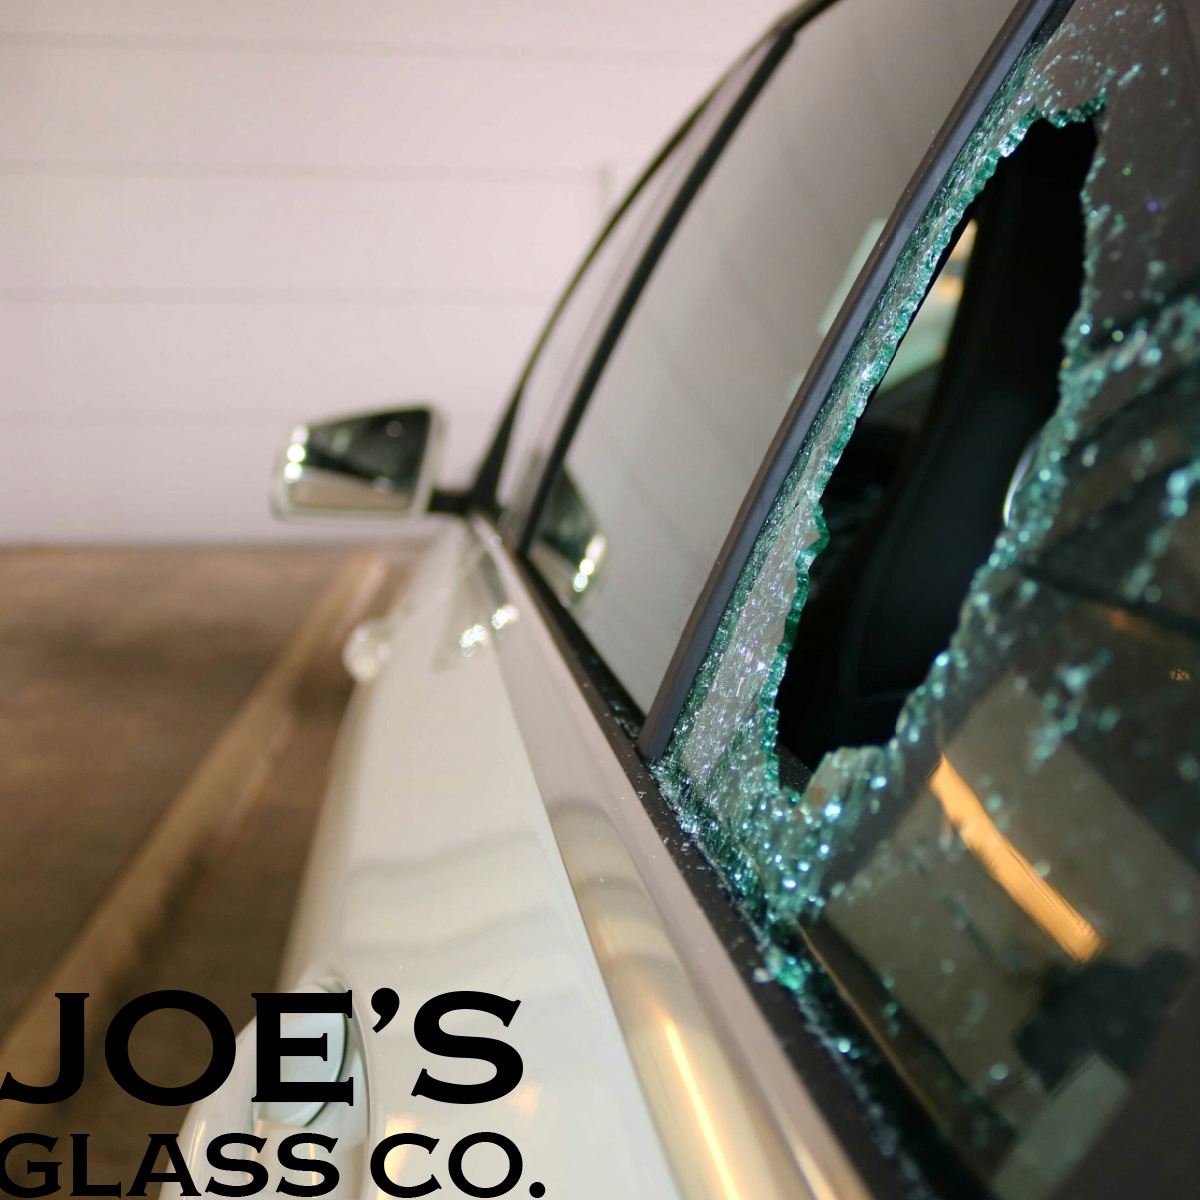 Your Trusted Auto Quarter Glass Replacement Service in Snohomish County